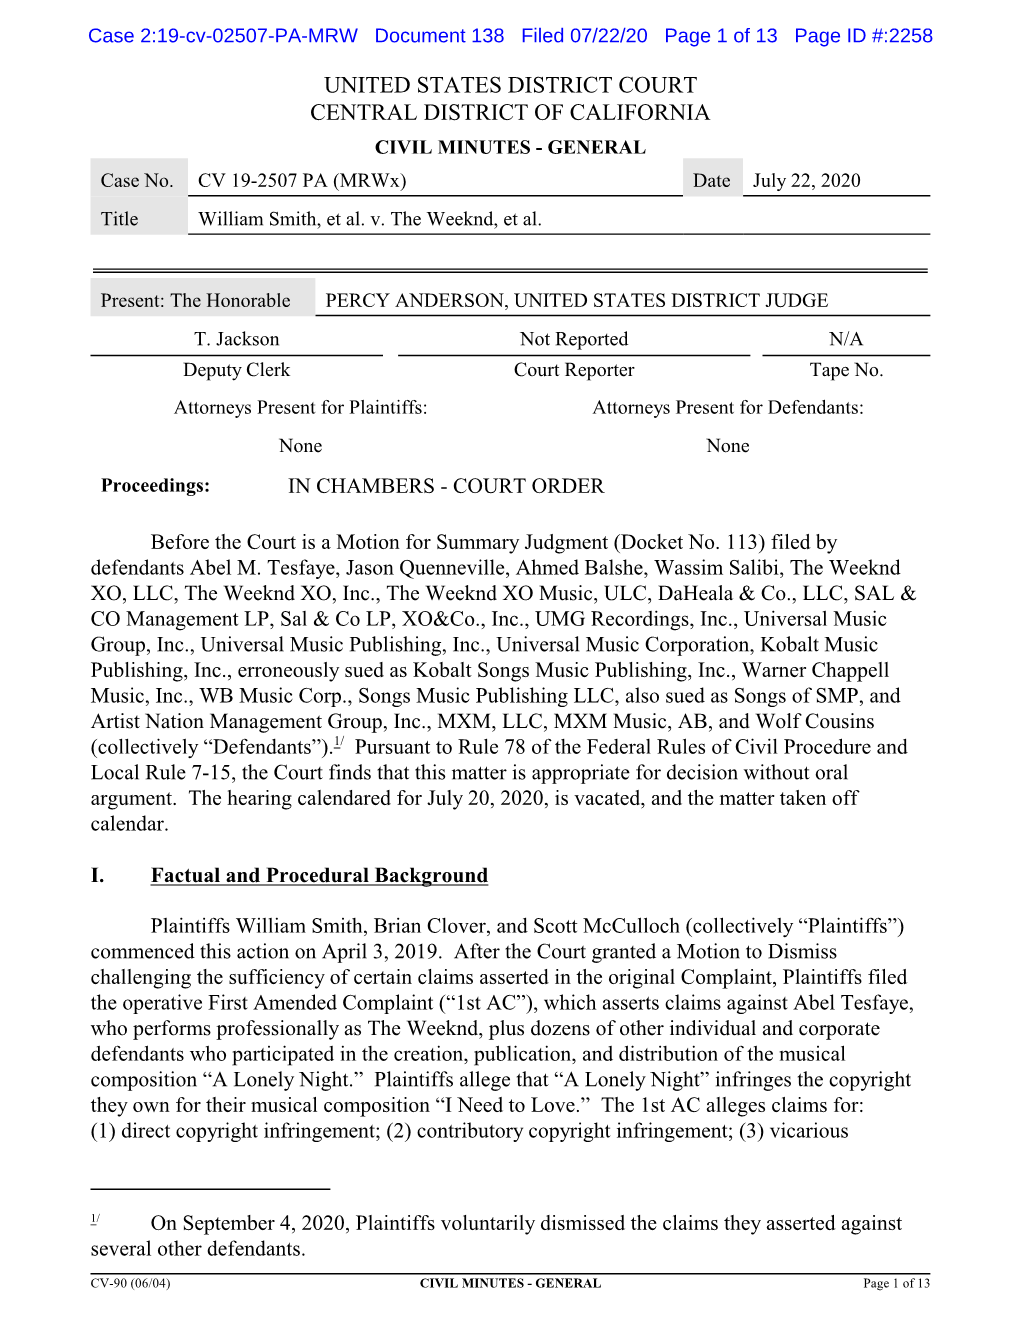 UNITED STATES DISTRICT COURT CENTRAL DISTRICT of CALIFORNIA CIVIL MINUTES - GENERAL Case No